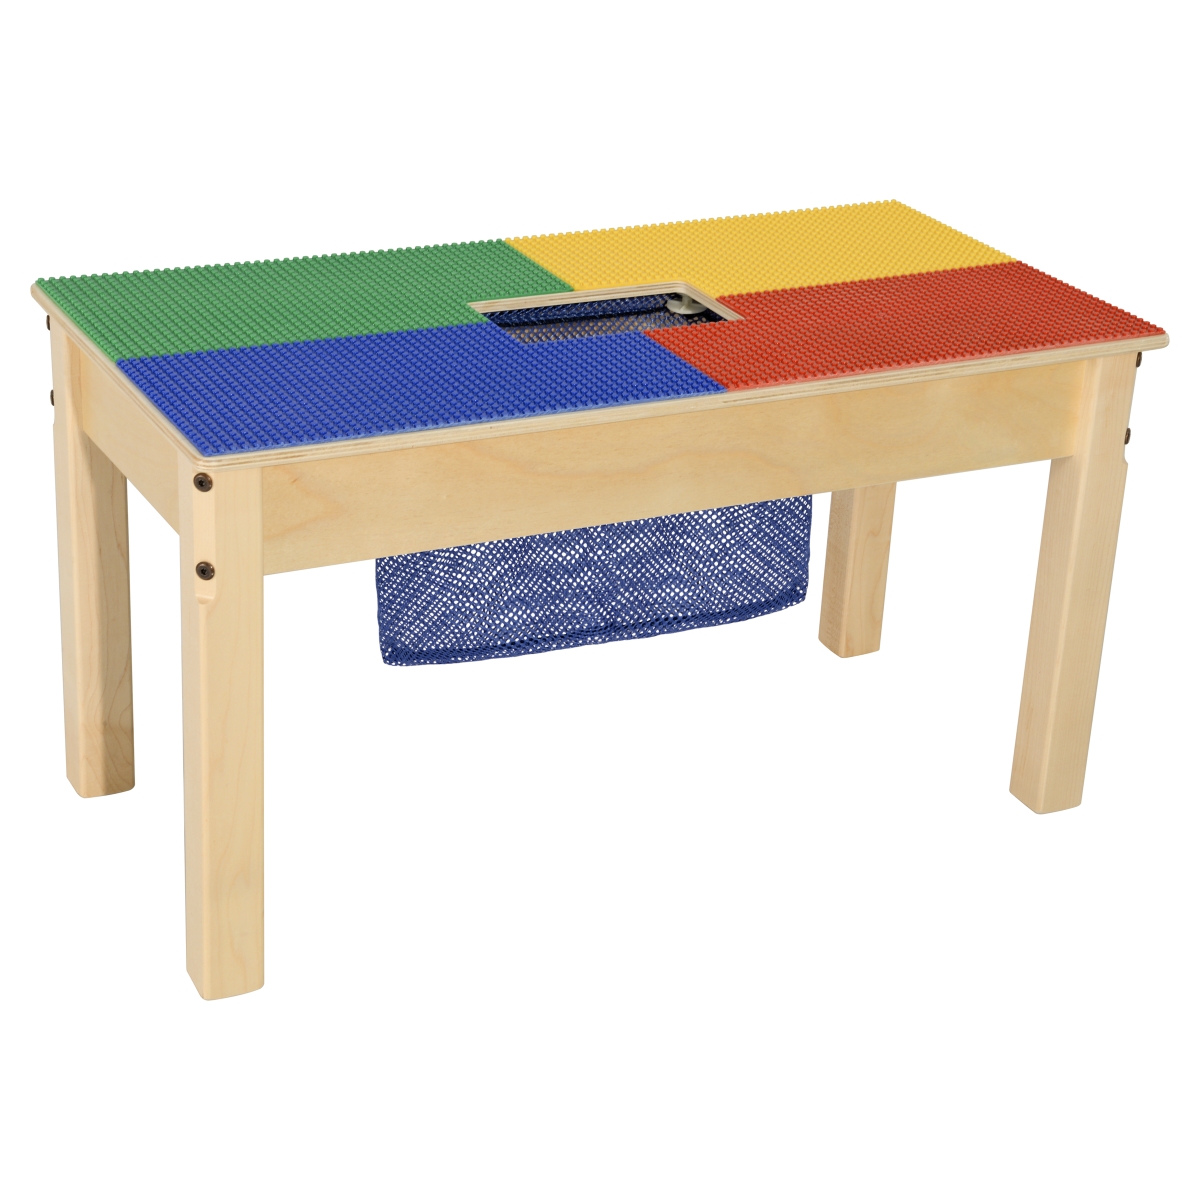 Tp1631sgn24 24 In. Lego Compatible Rectangle Table With Legs, Multi Color